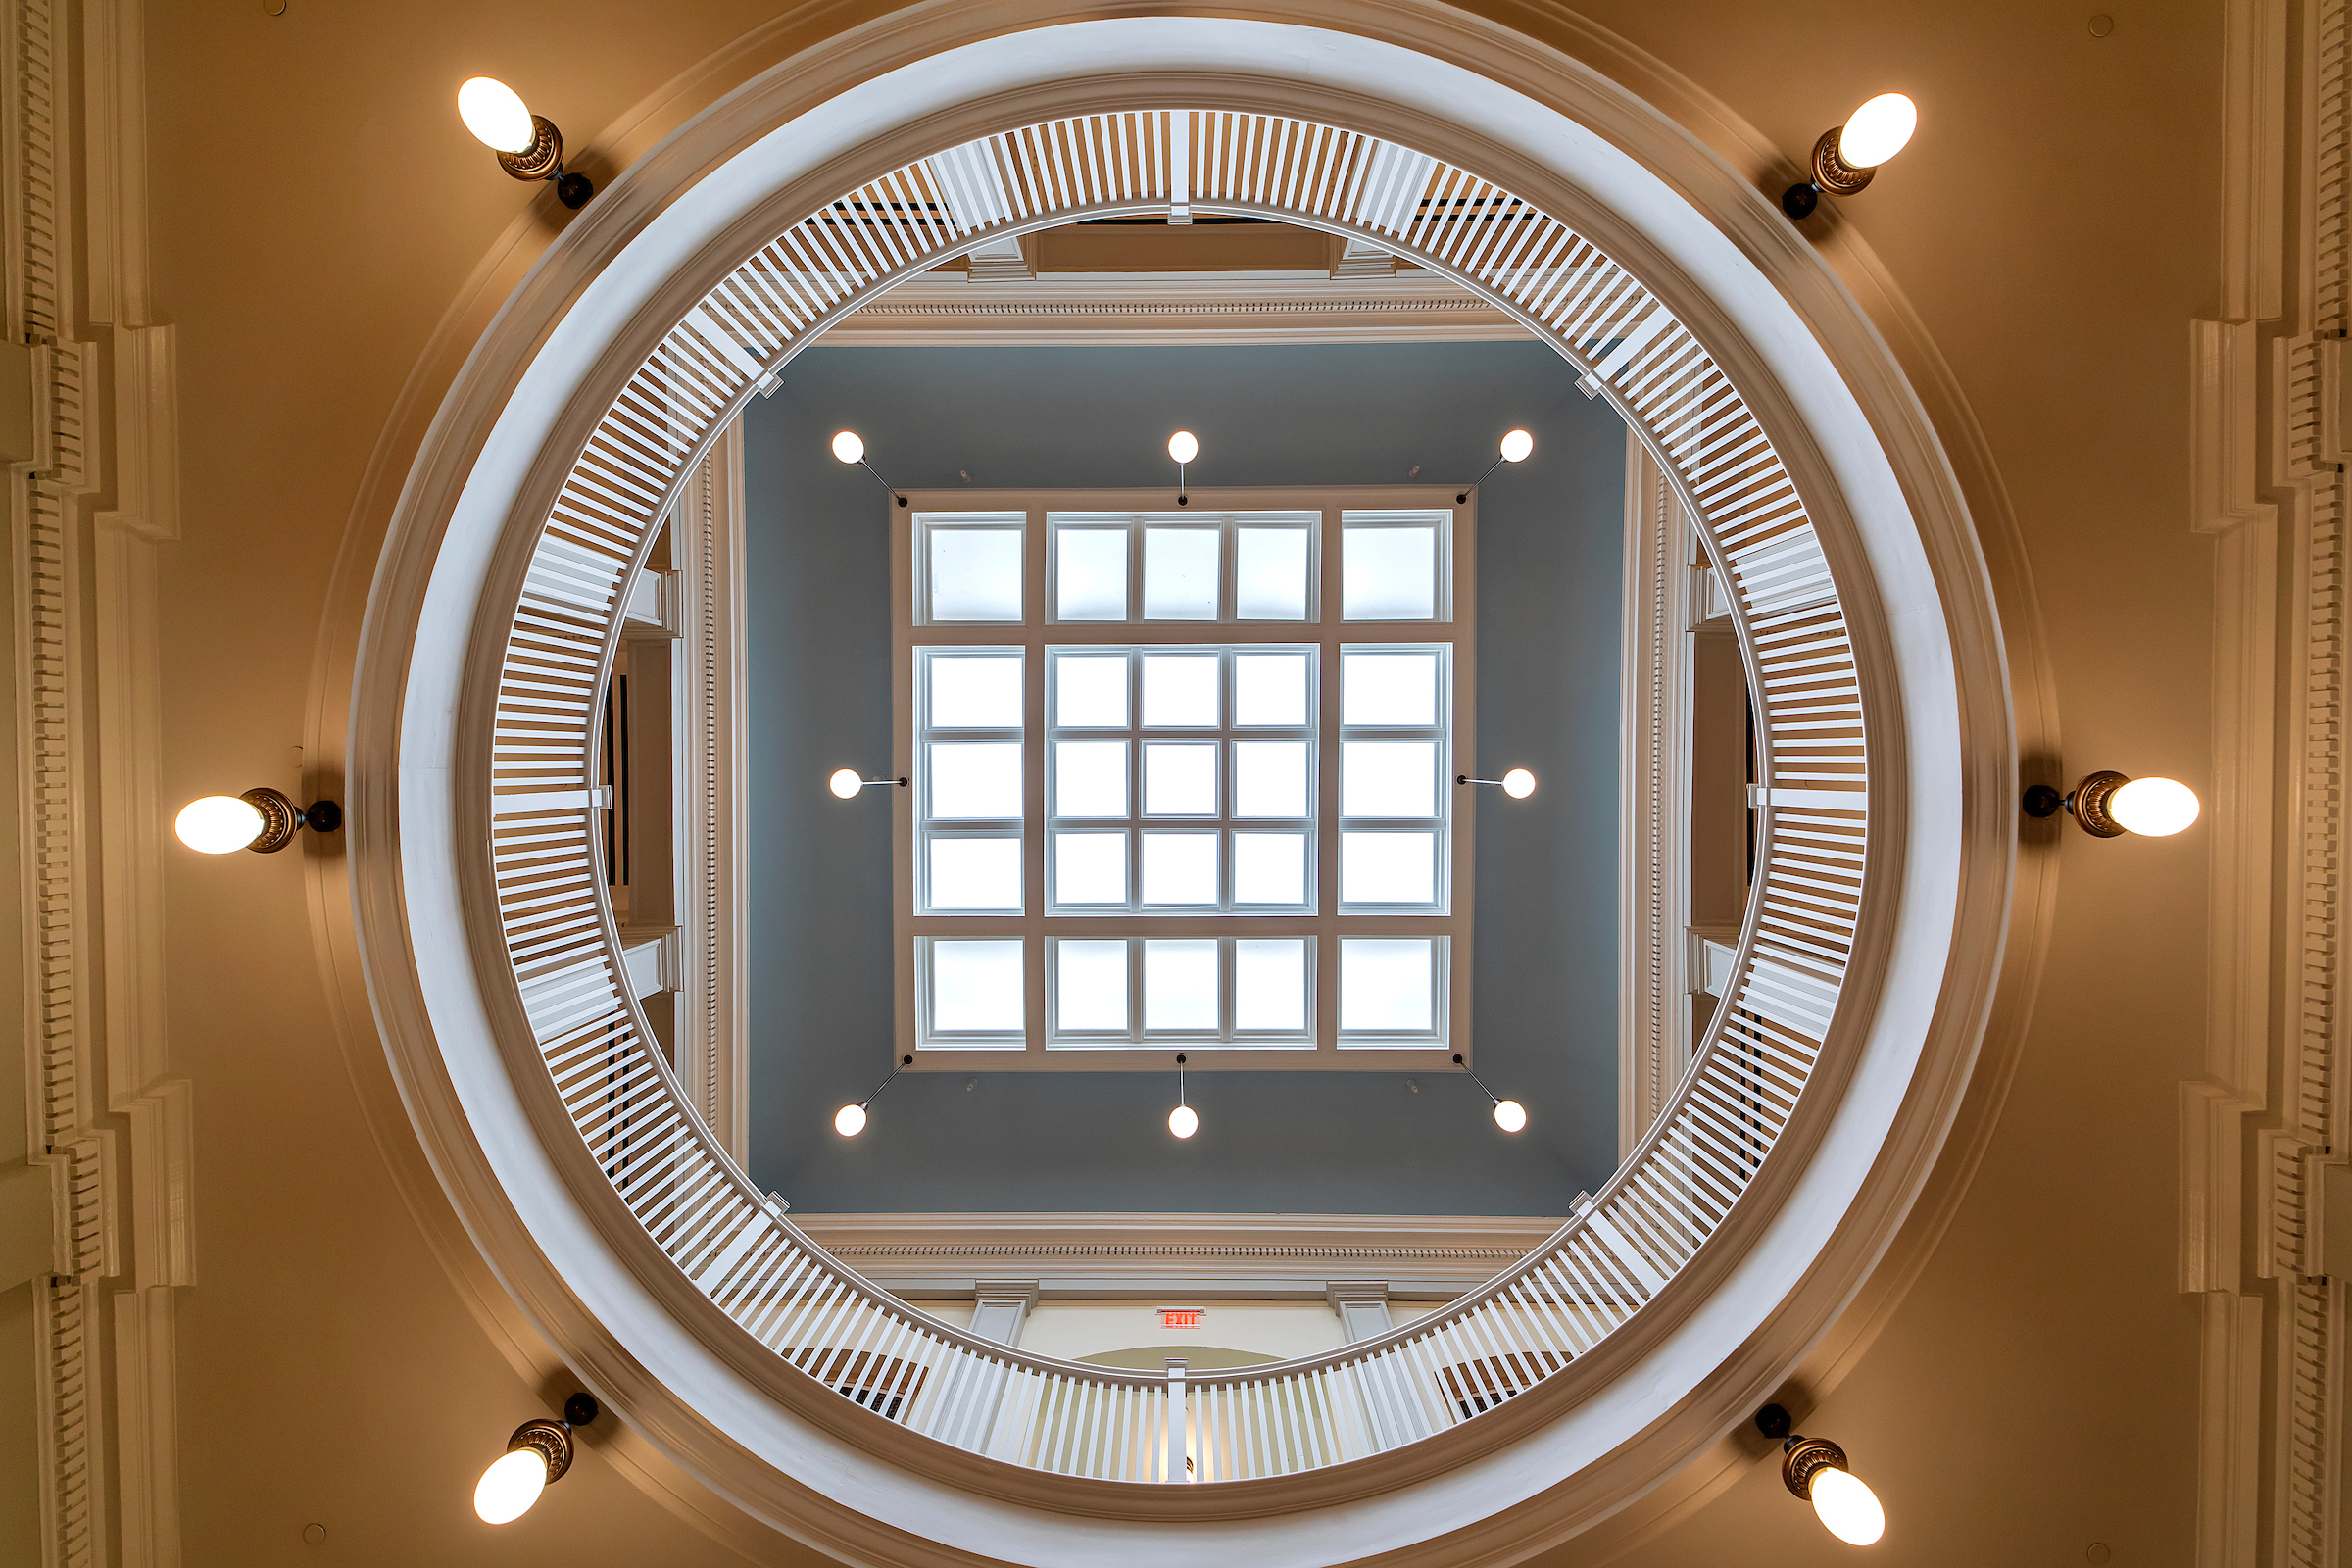 The Hill Hall Rotunda ceiling seen from straight below.